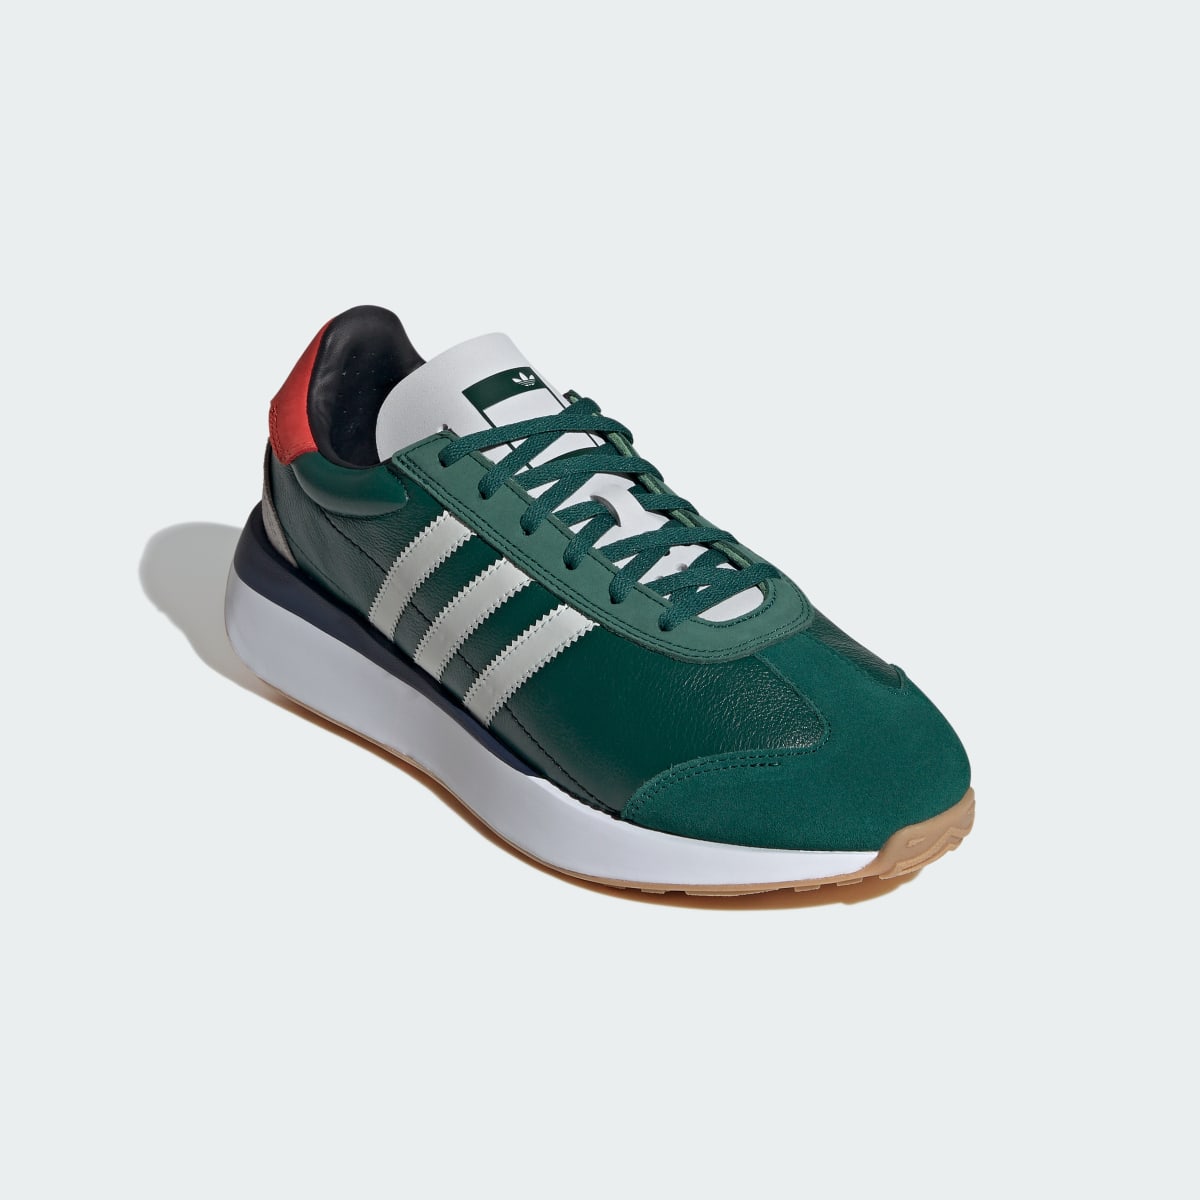 Adidas Country XLG Shoes. 5